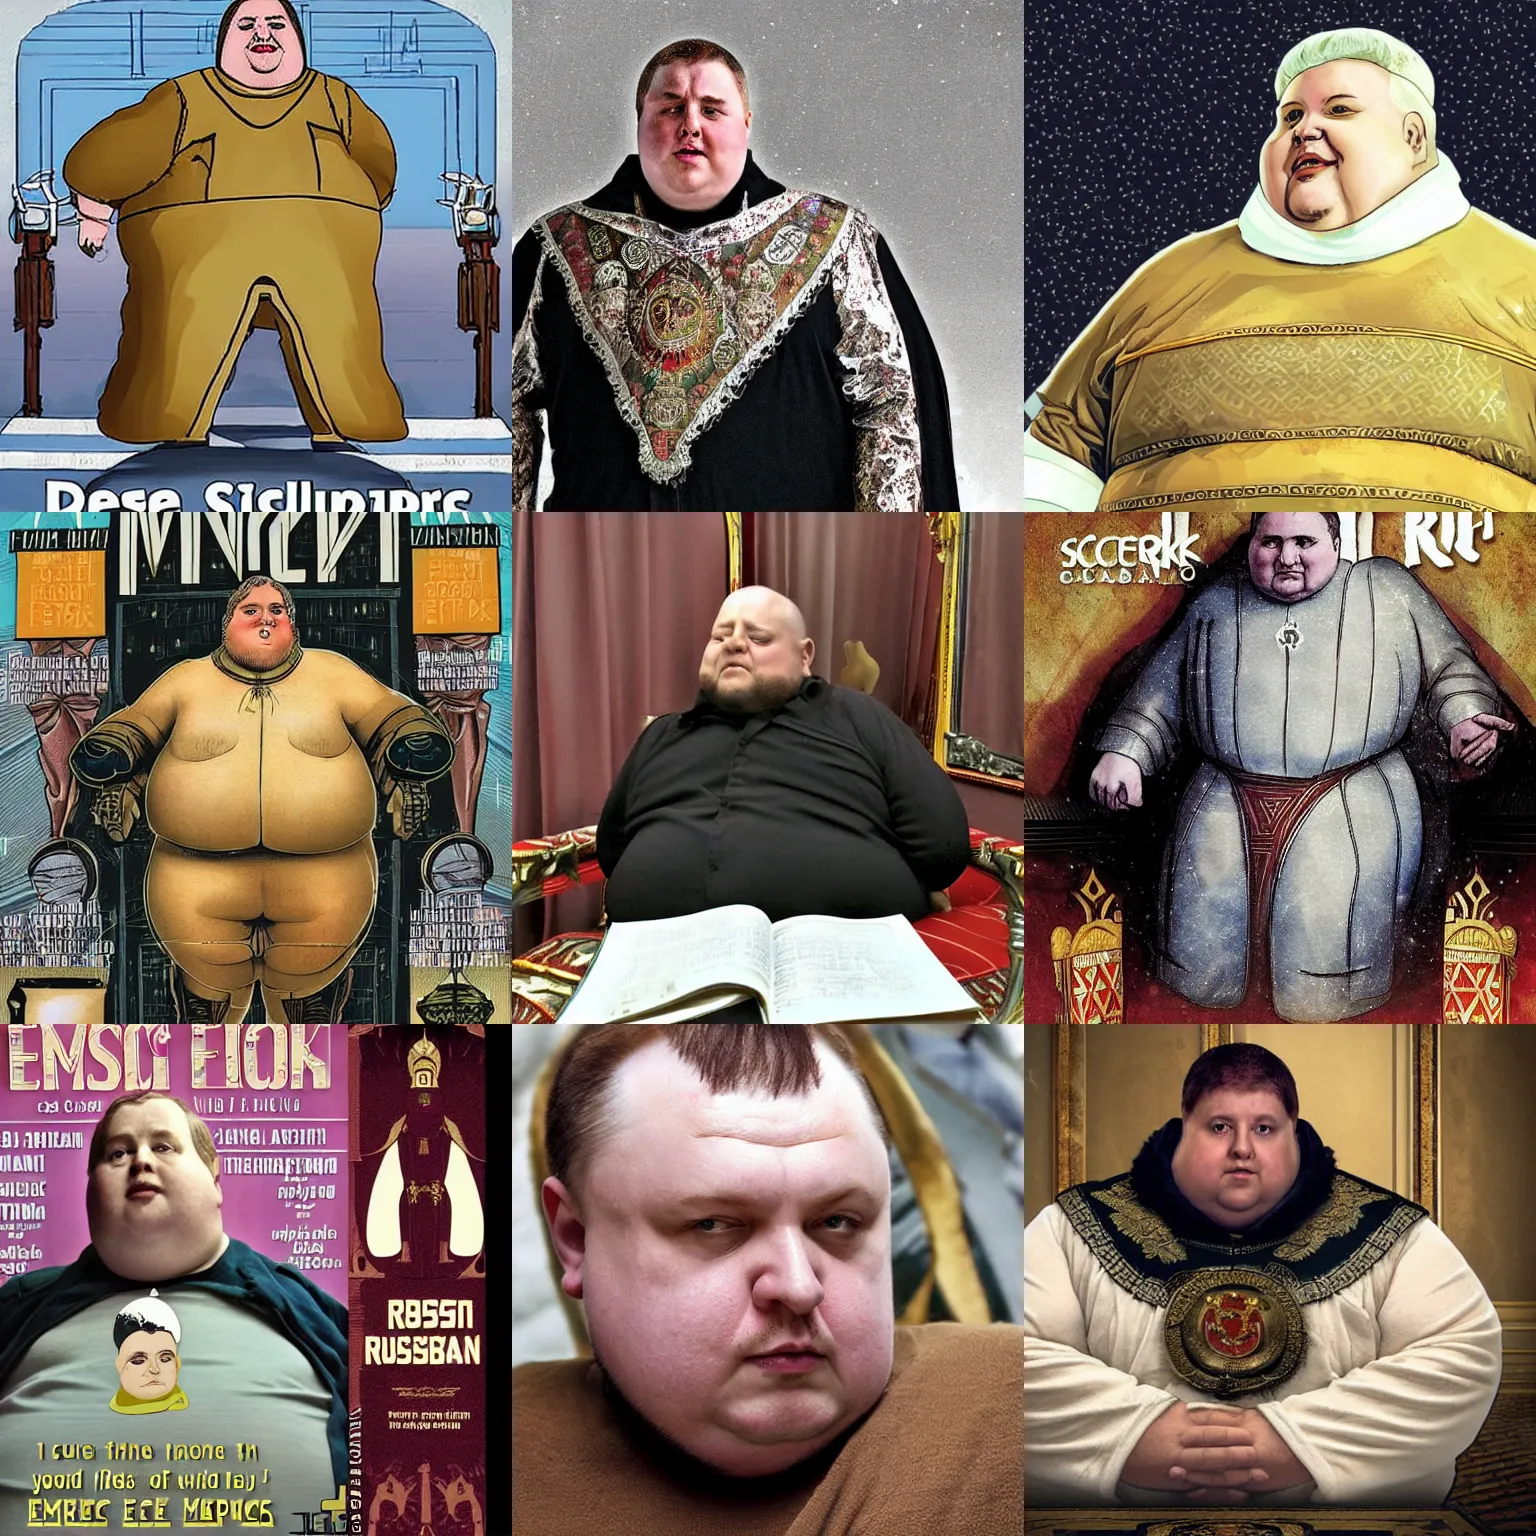 Prompt: obese russian sci - fi writer pretending himself as an emperor